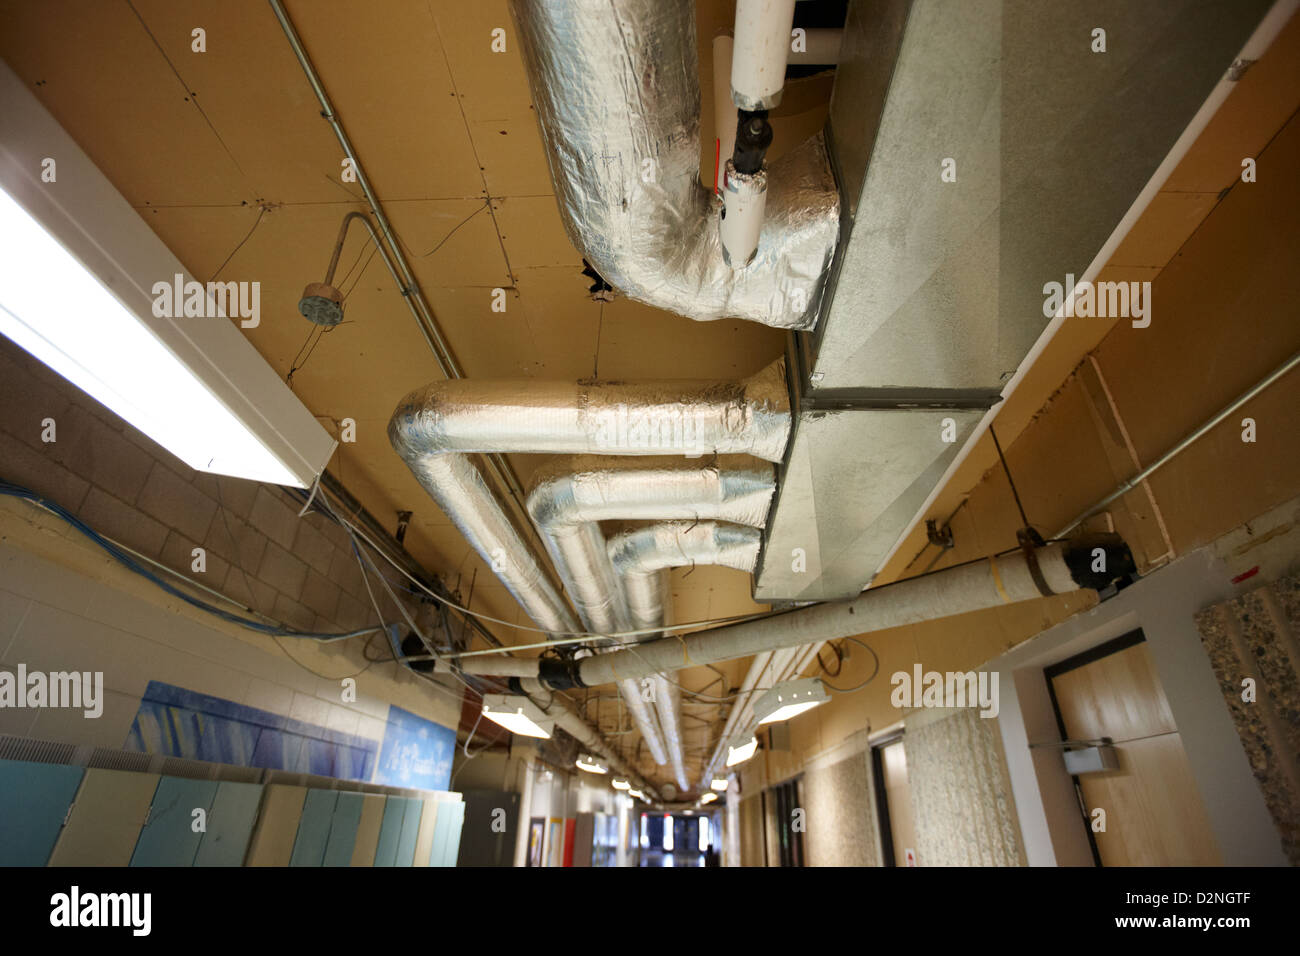 Exposed Ceiling Stock Photos Exposed Ceiling Stock Images Alamy